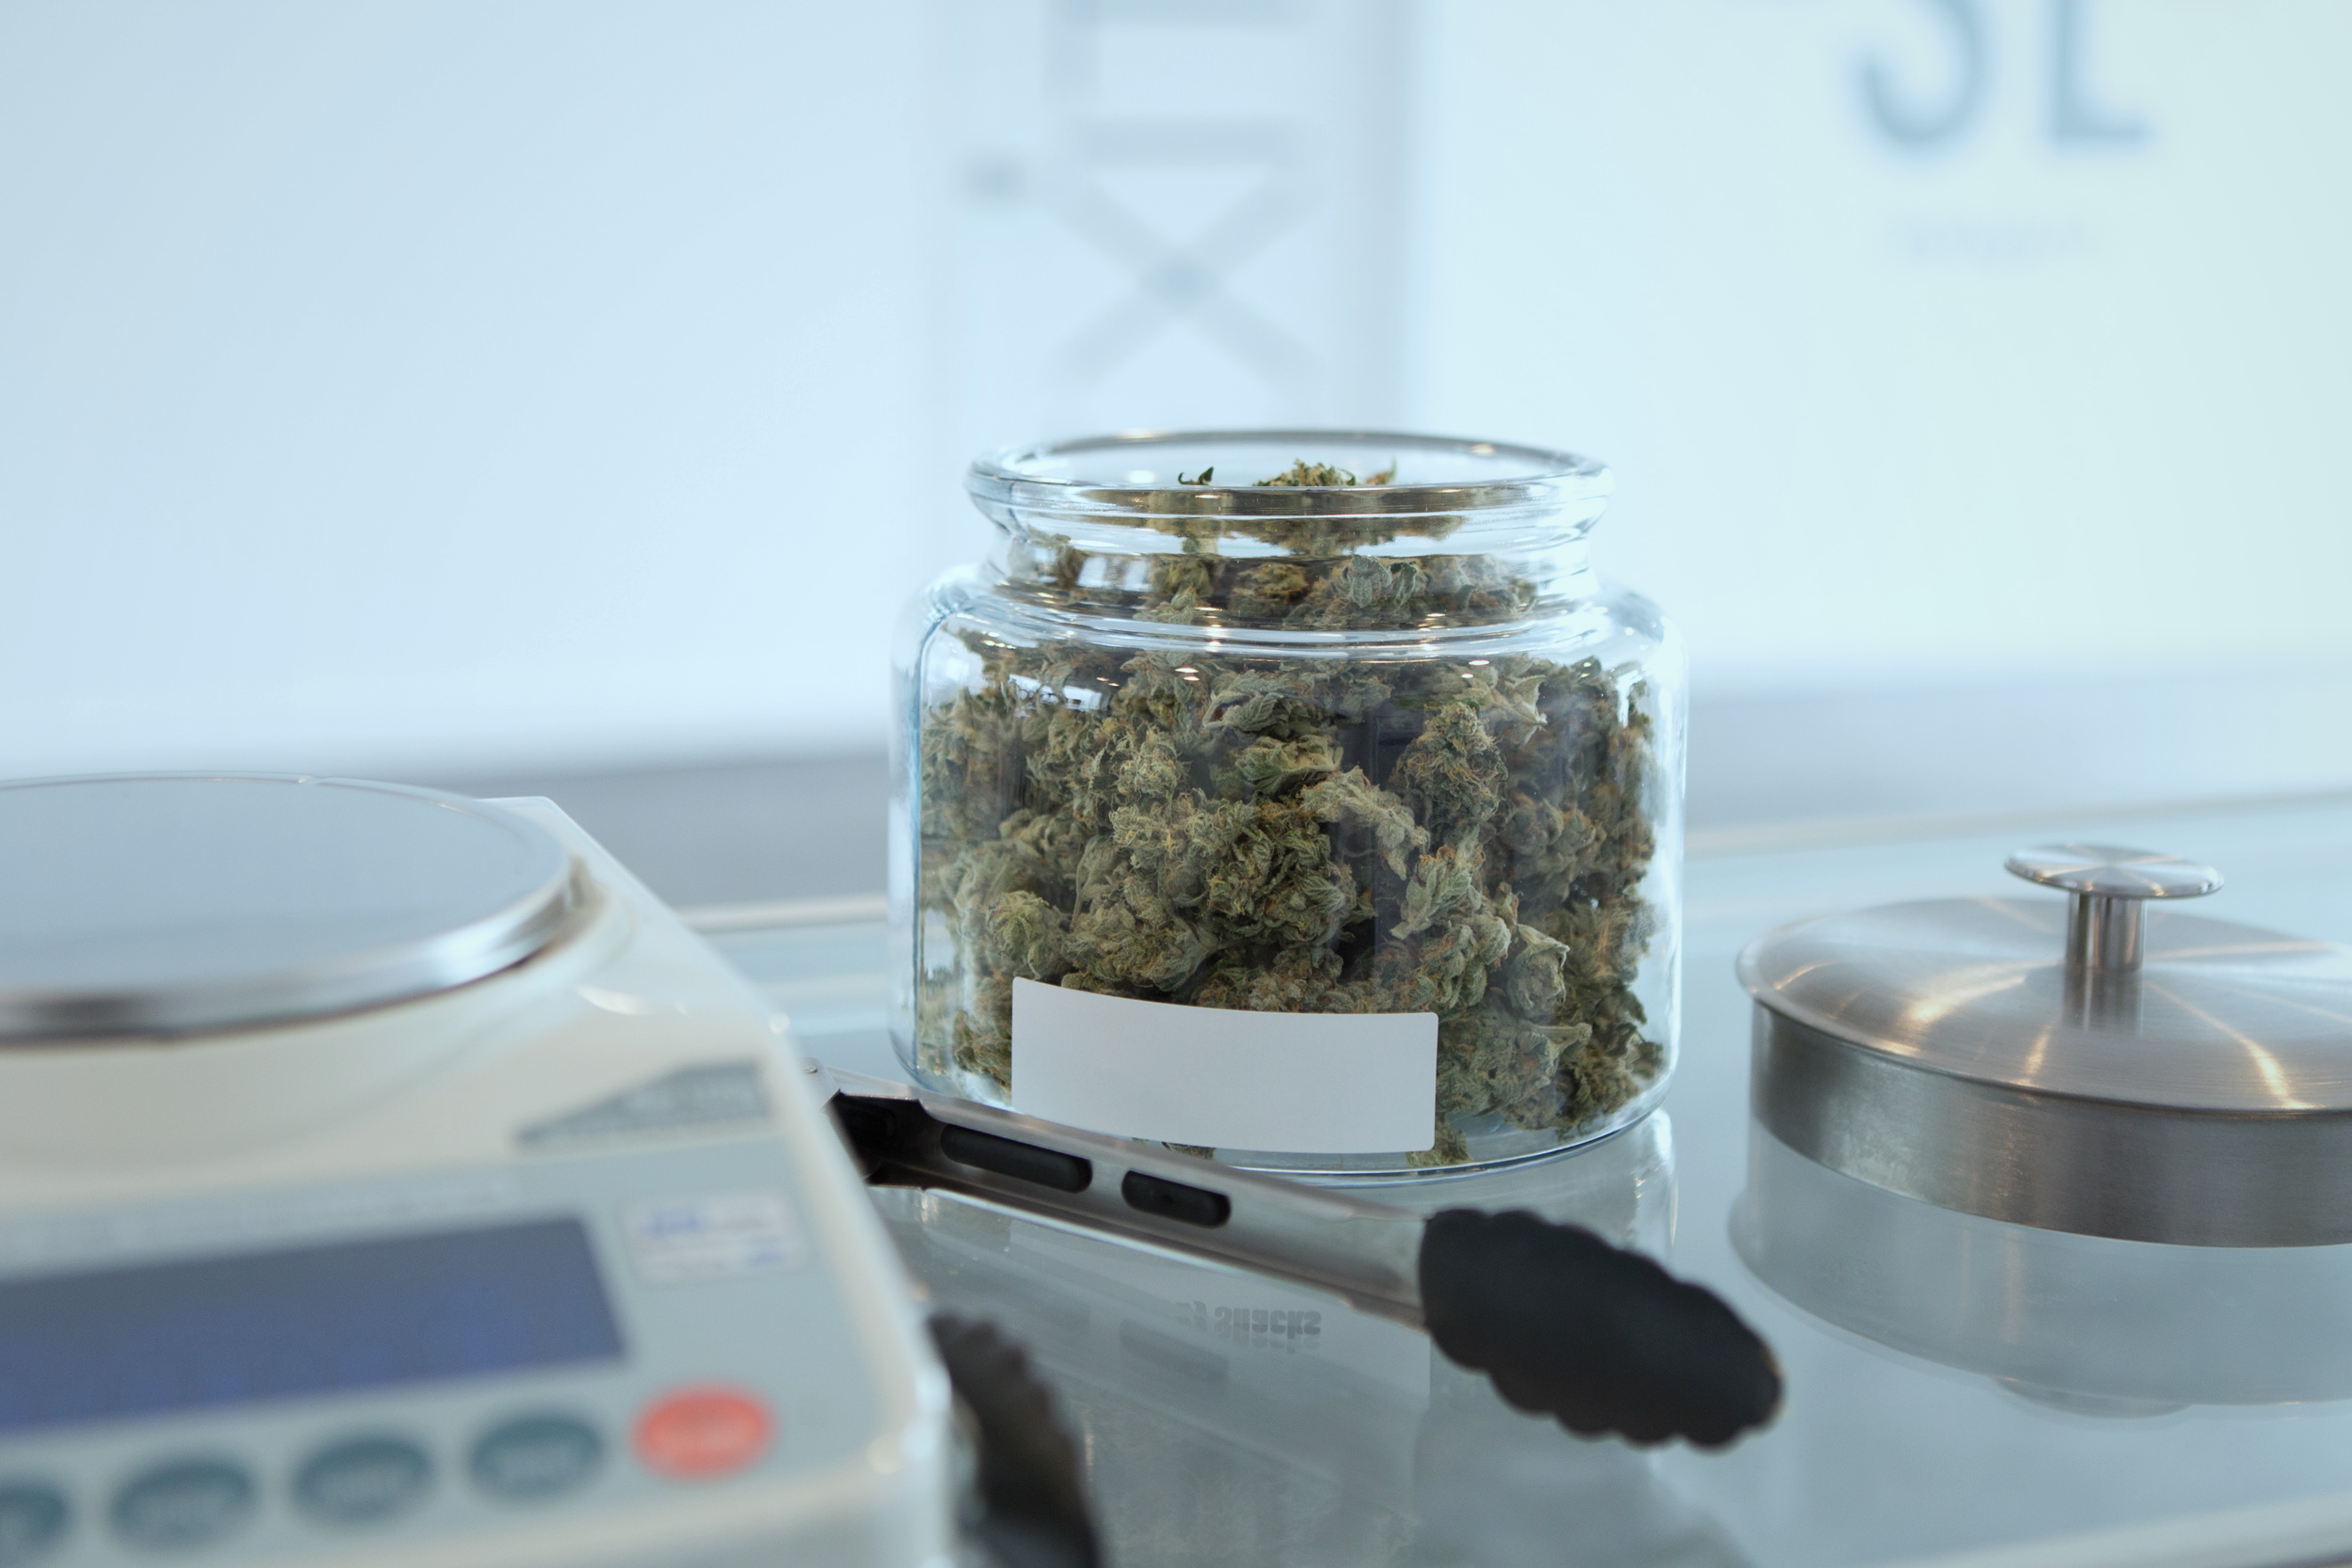 GrowerIQ's cannabis consultants can write custom SOPs for your facility in areas from Cultivation & Production, all the way through to Sanitation. Get started today.